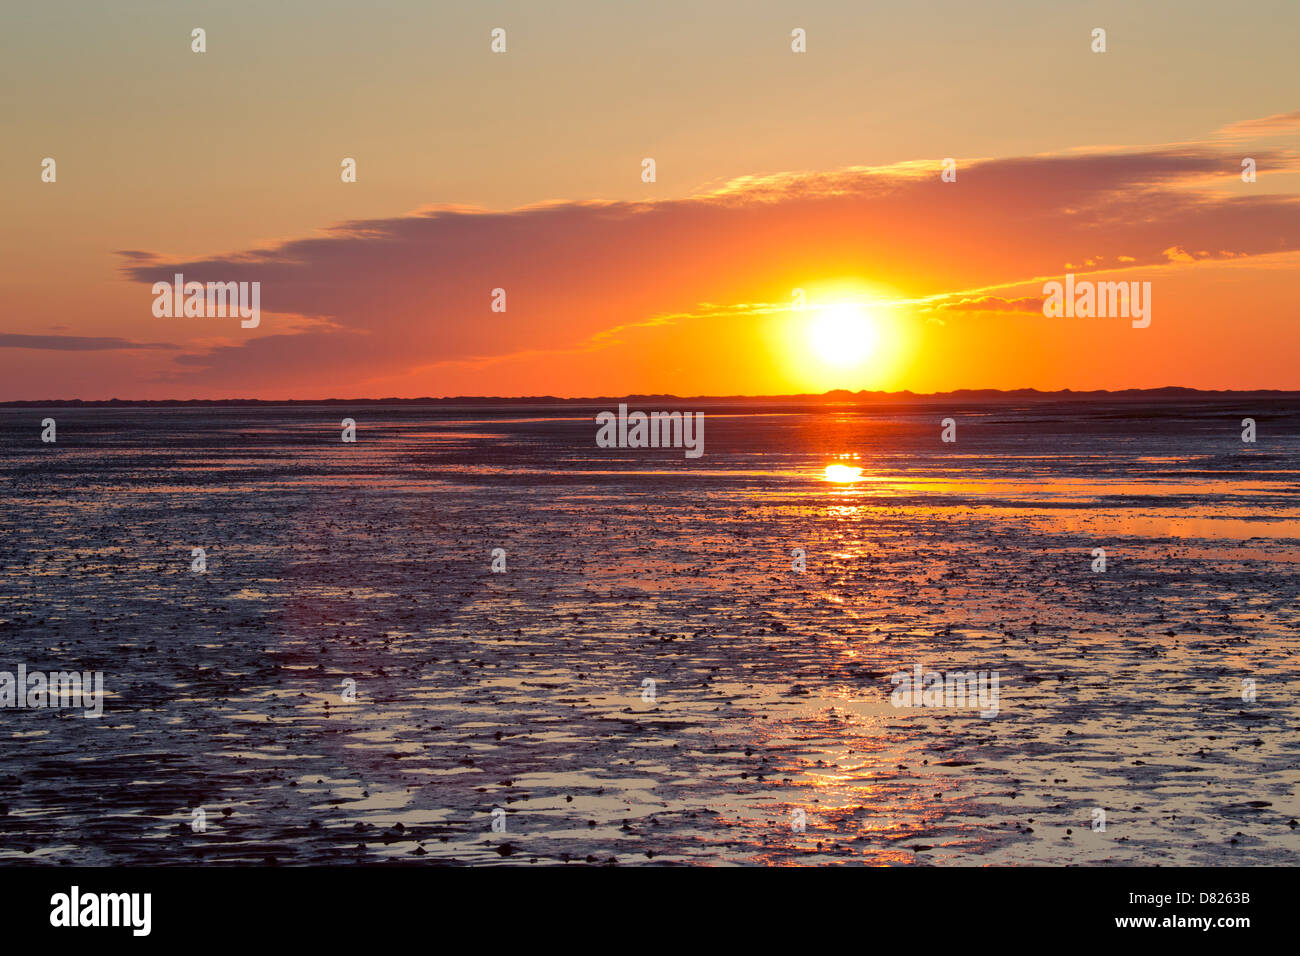 Sunset over the Wadden Sea, Germany Stock Photo